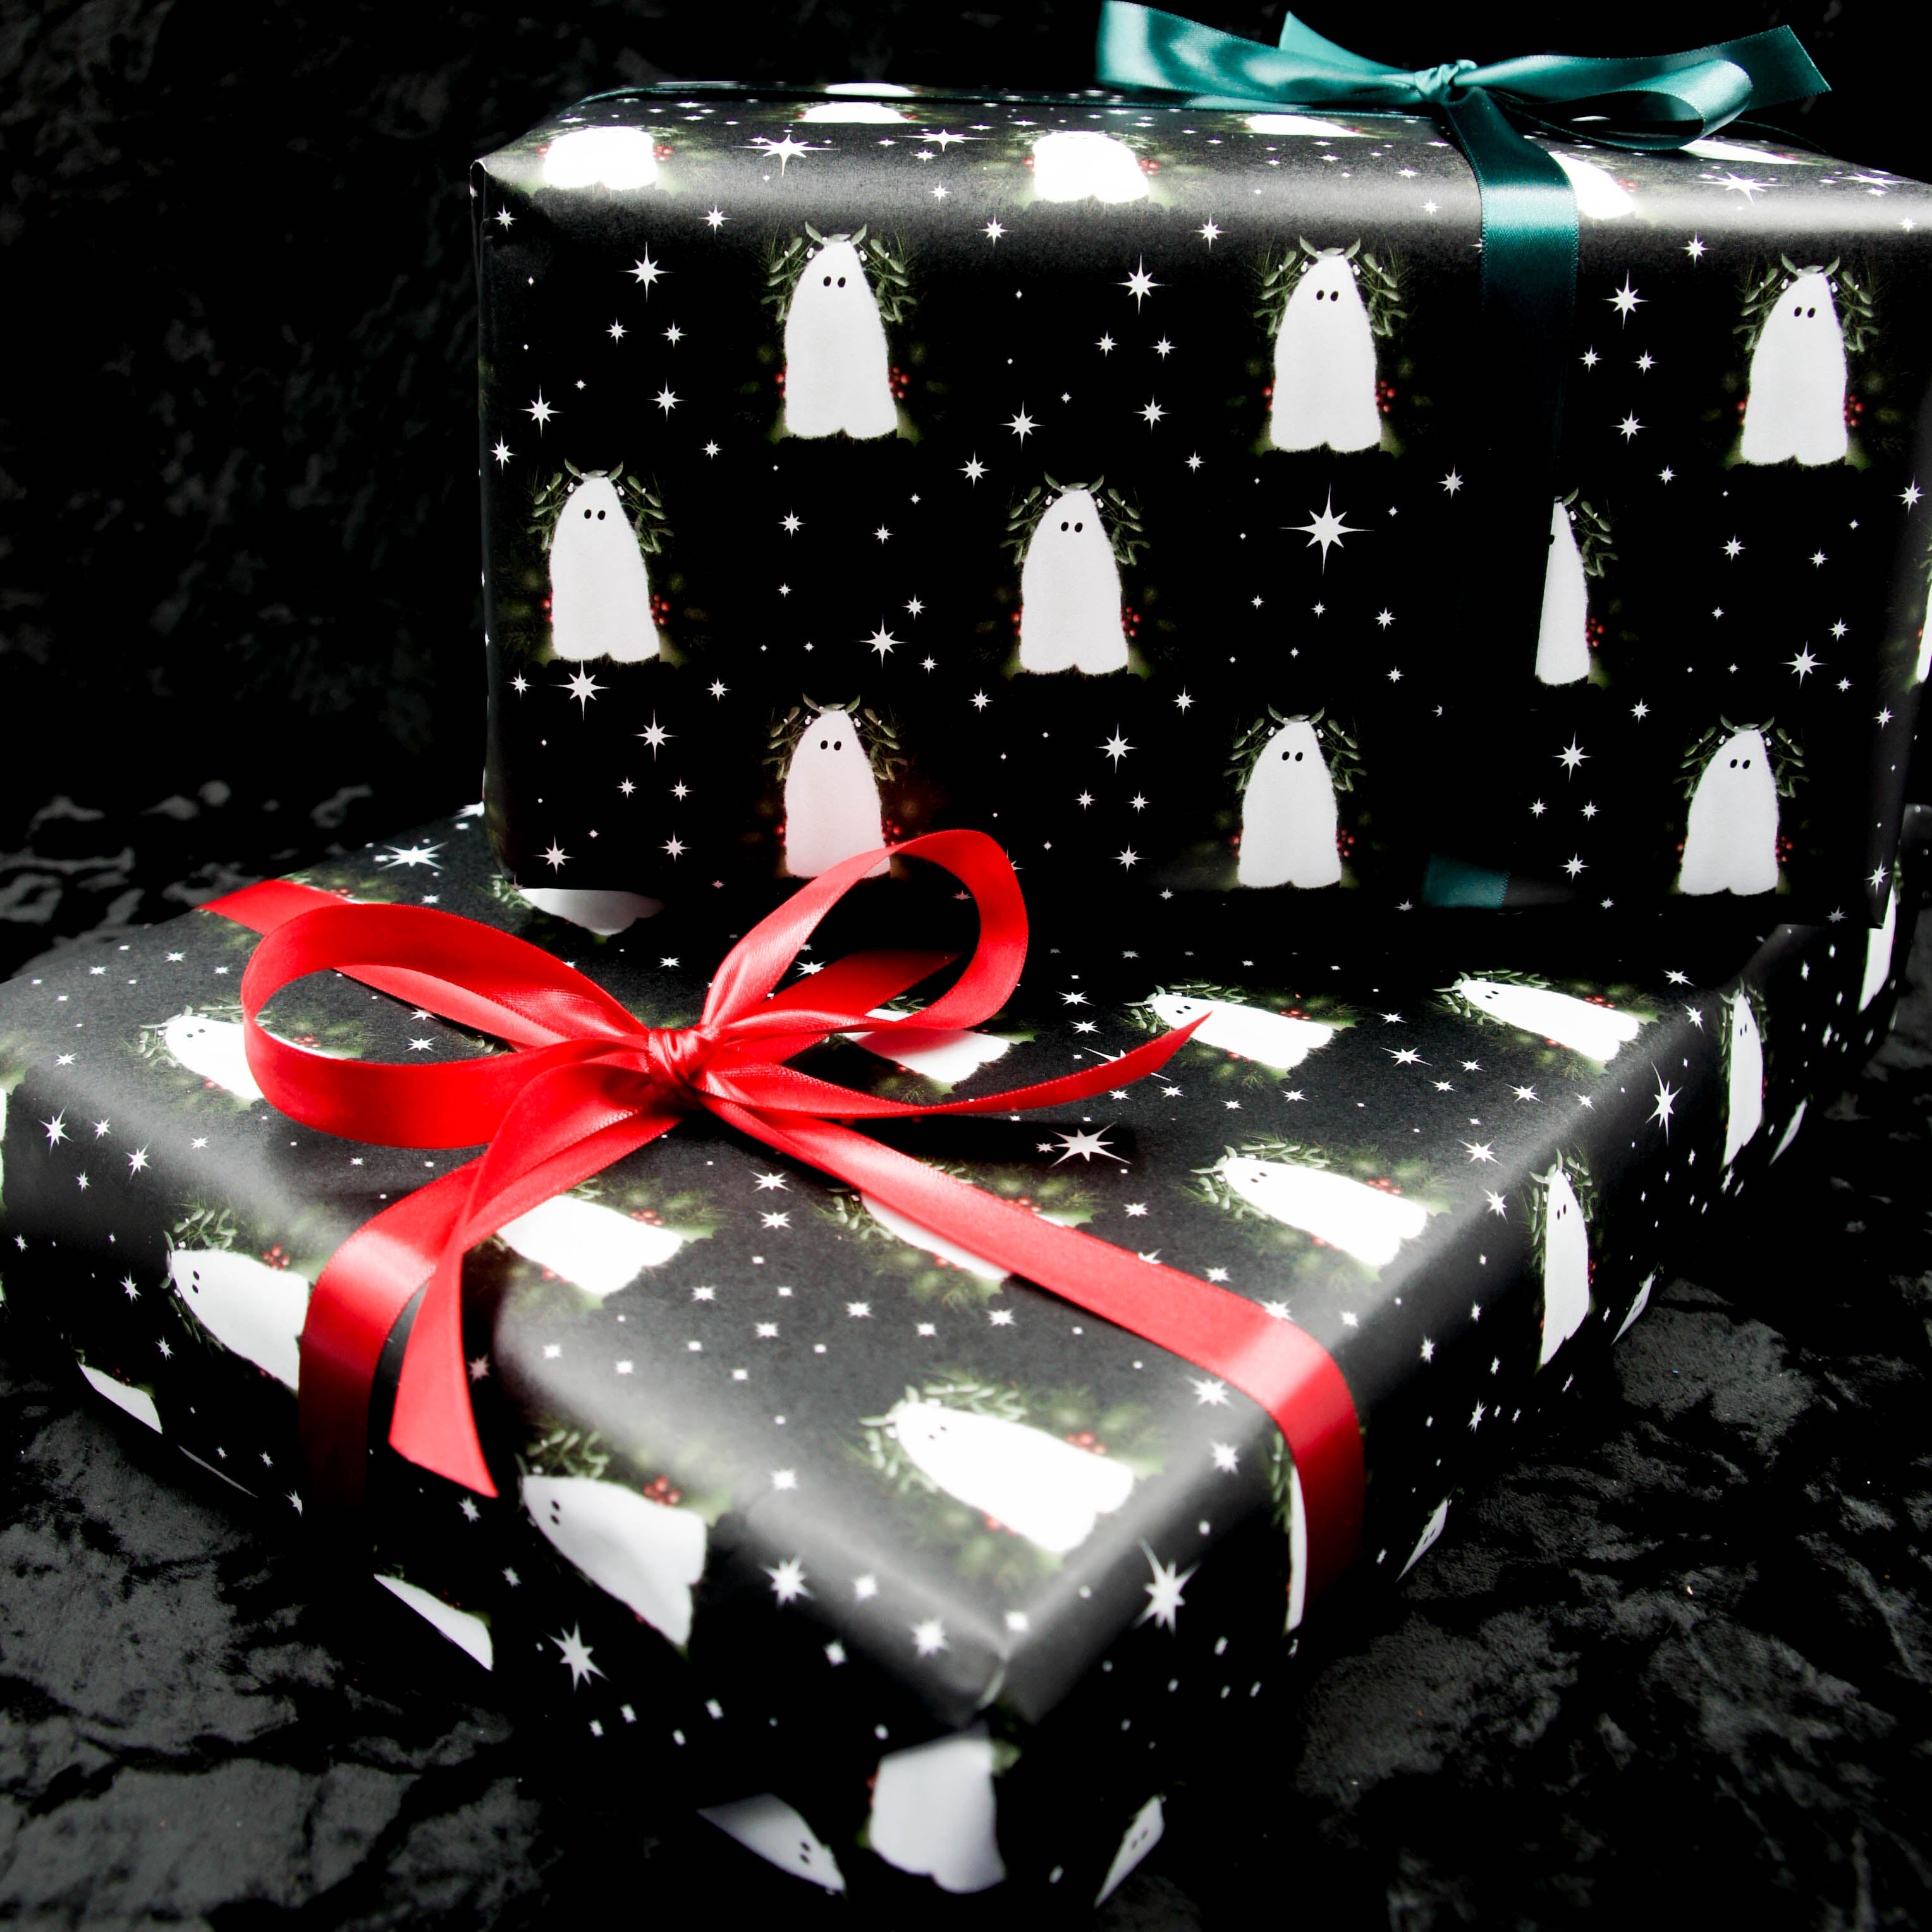 Gothic Wrapping Paper – The Gothic Stationery Company